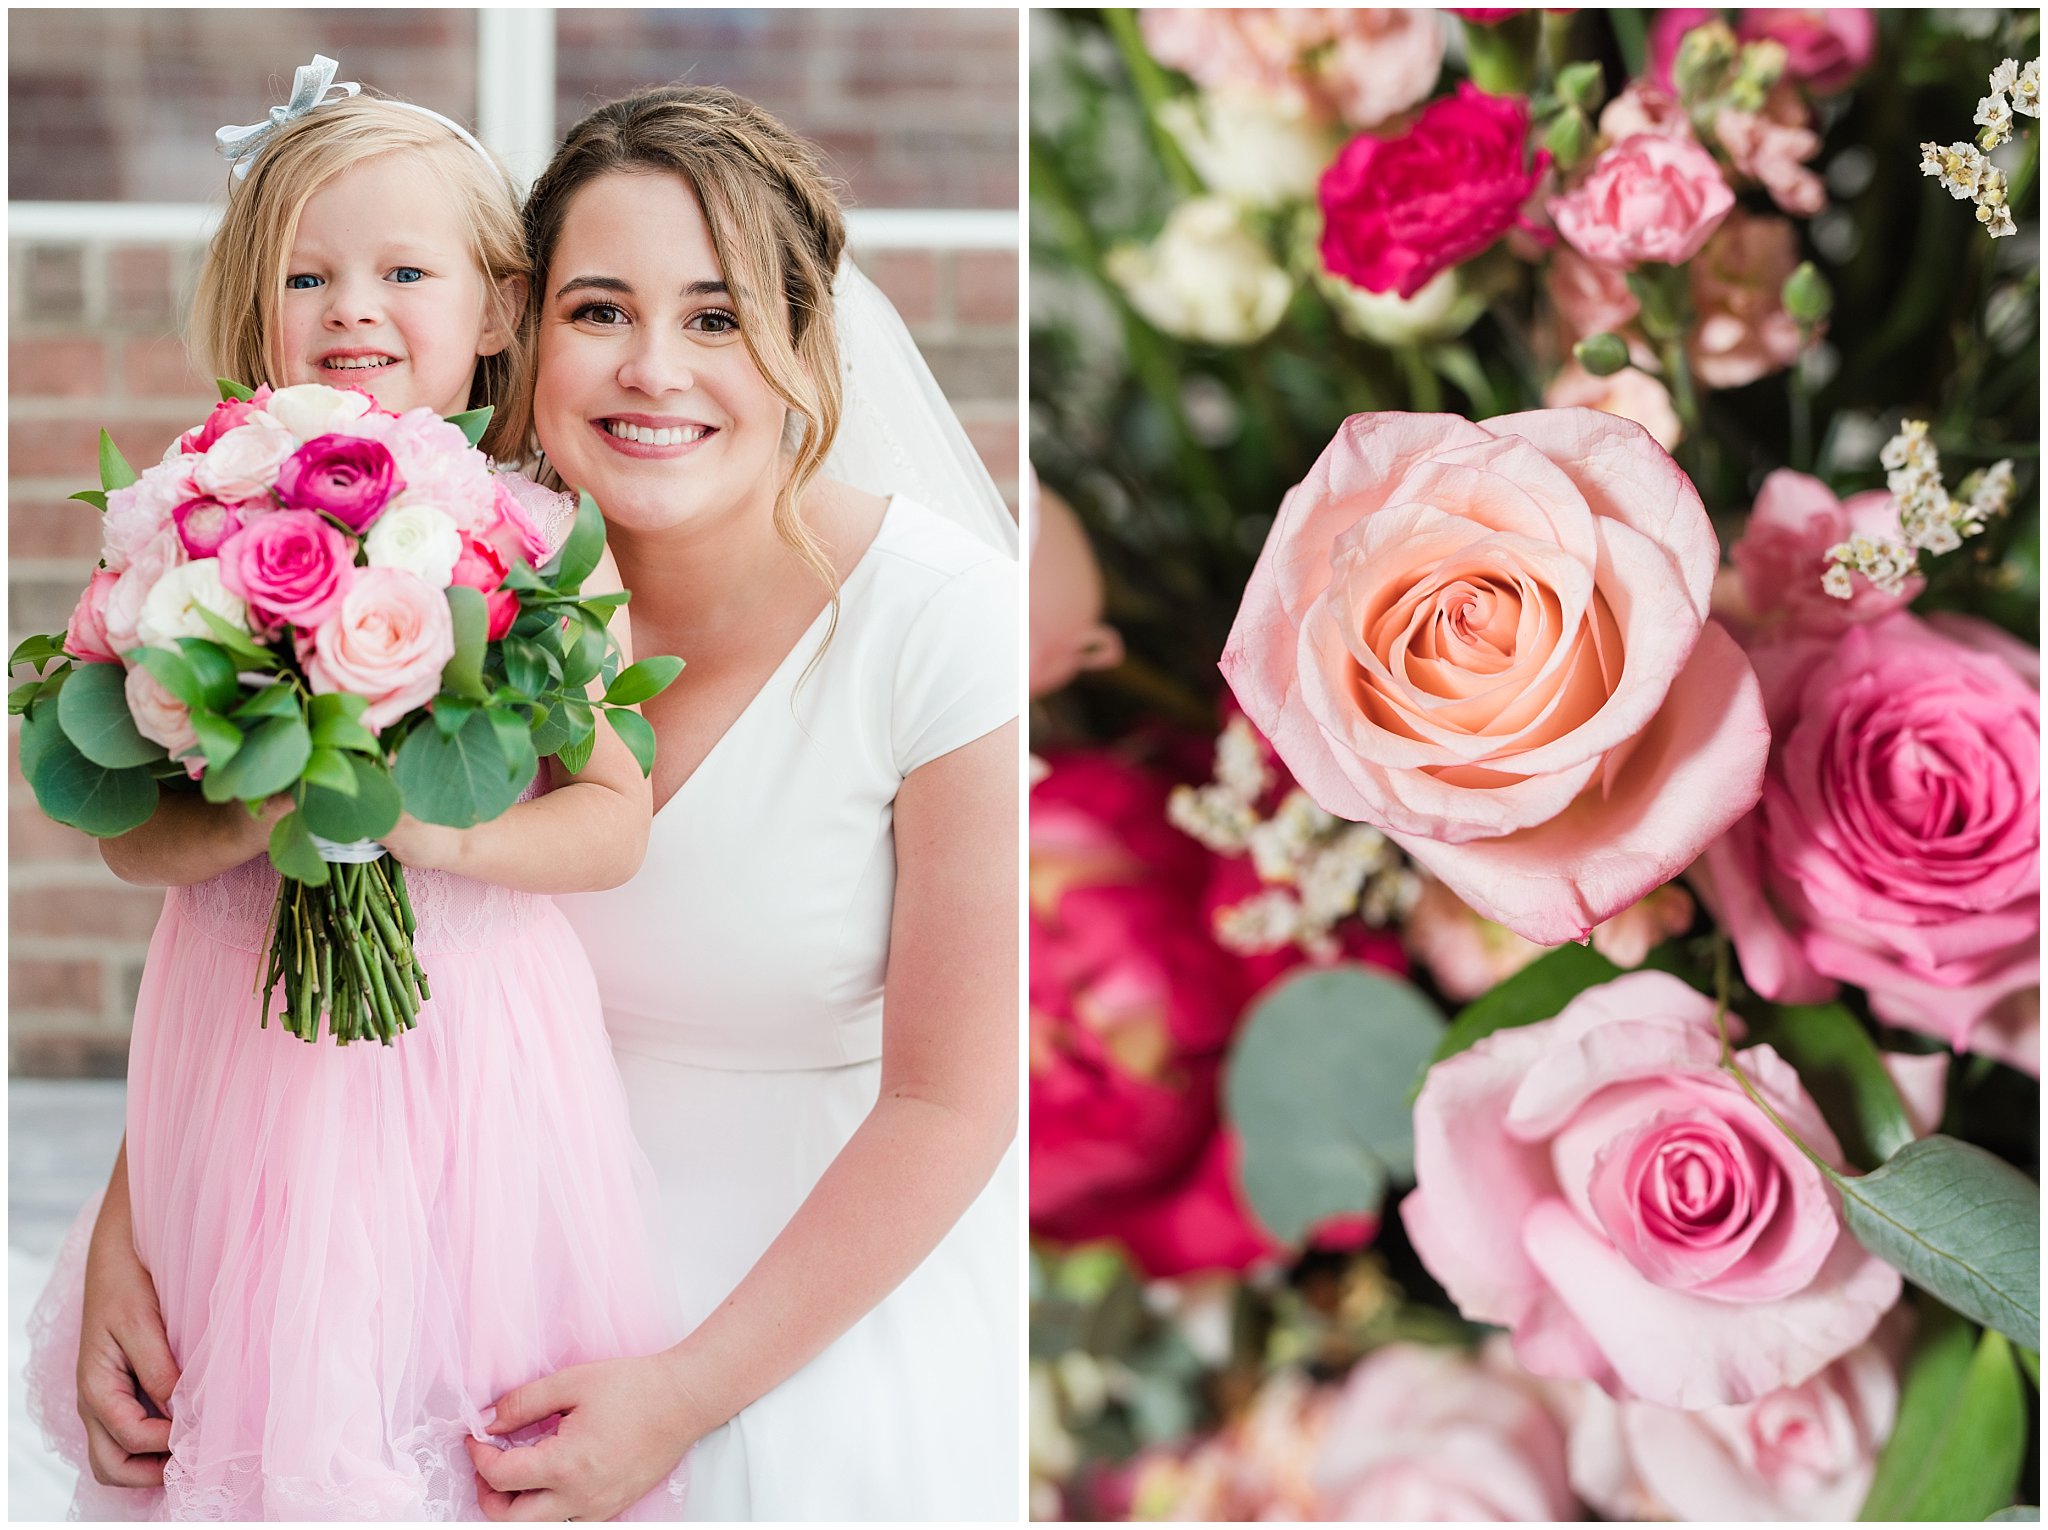 Bride and bridesmaids wearing cream colored dresses in front of floral arch in shades of pink | Talia Event Center Summer Wedding | Jessie and Dallin Photography